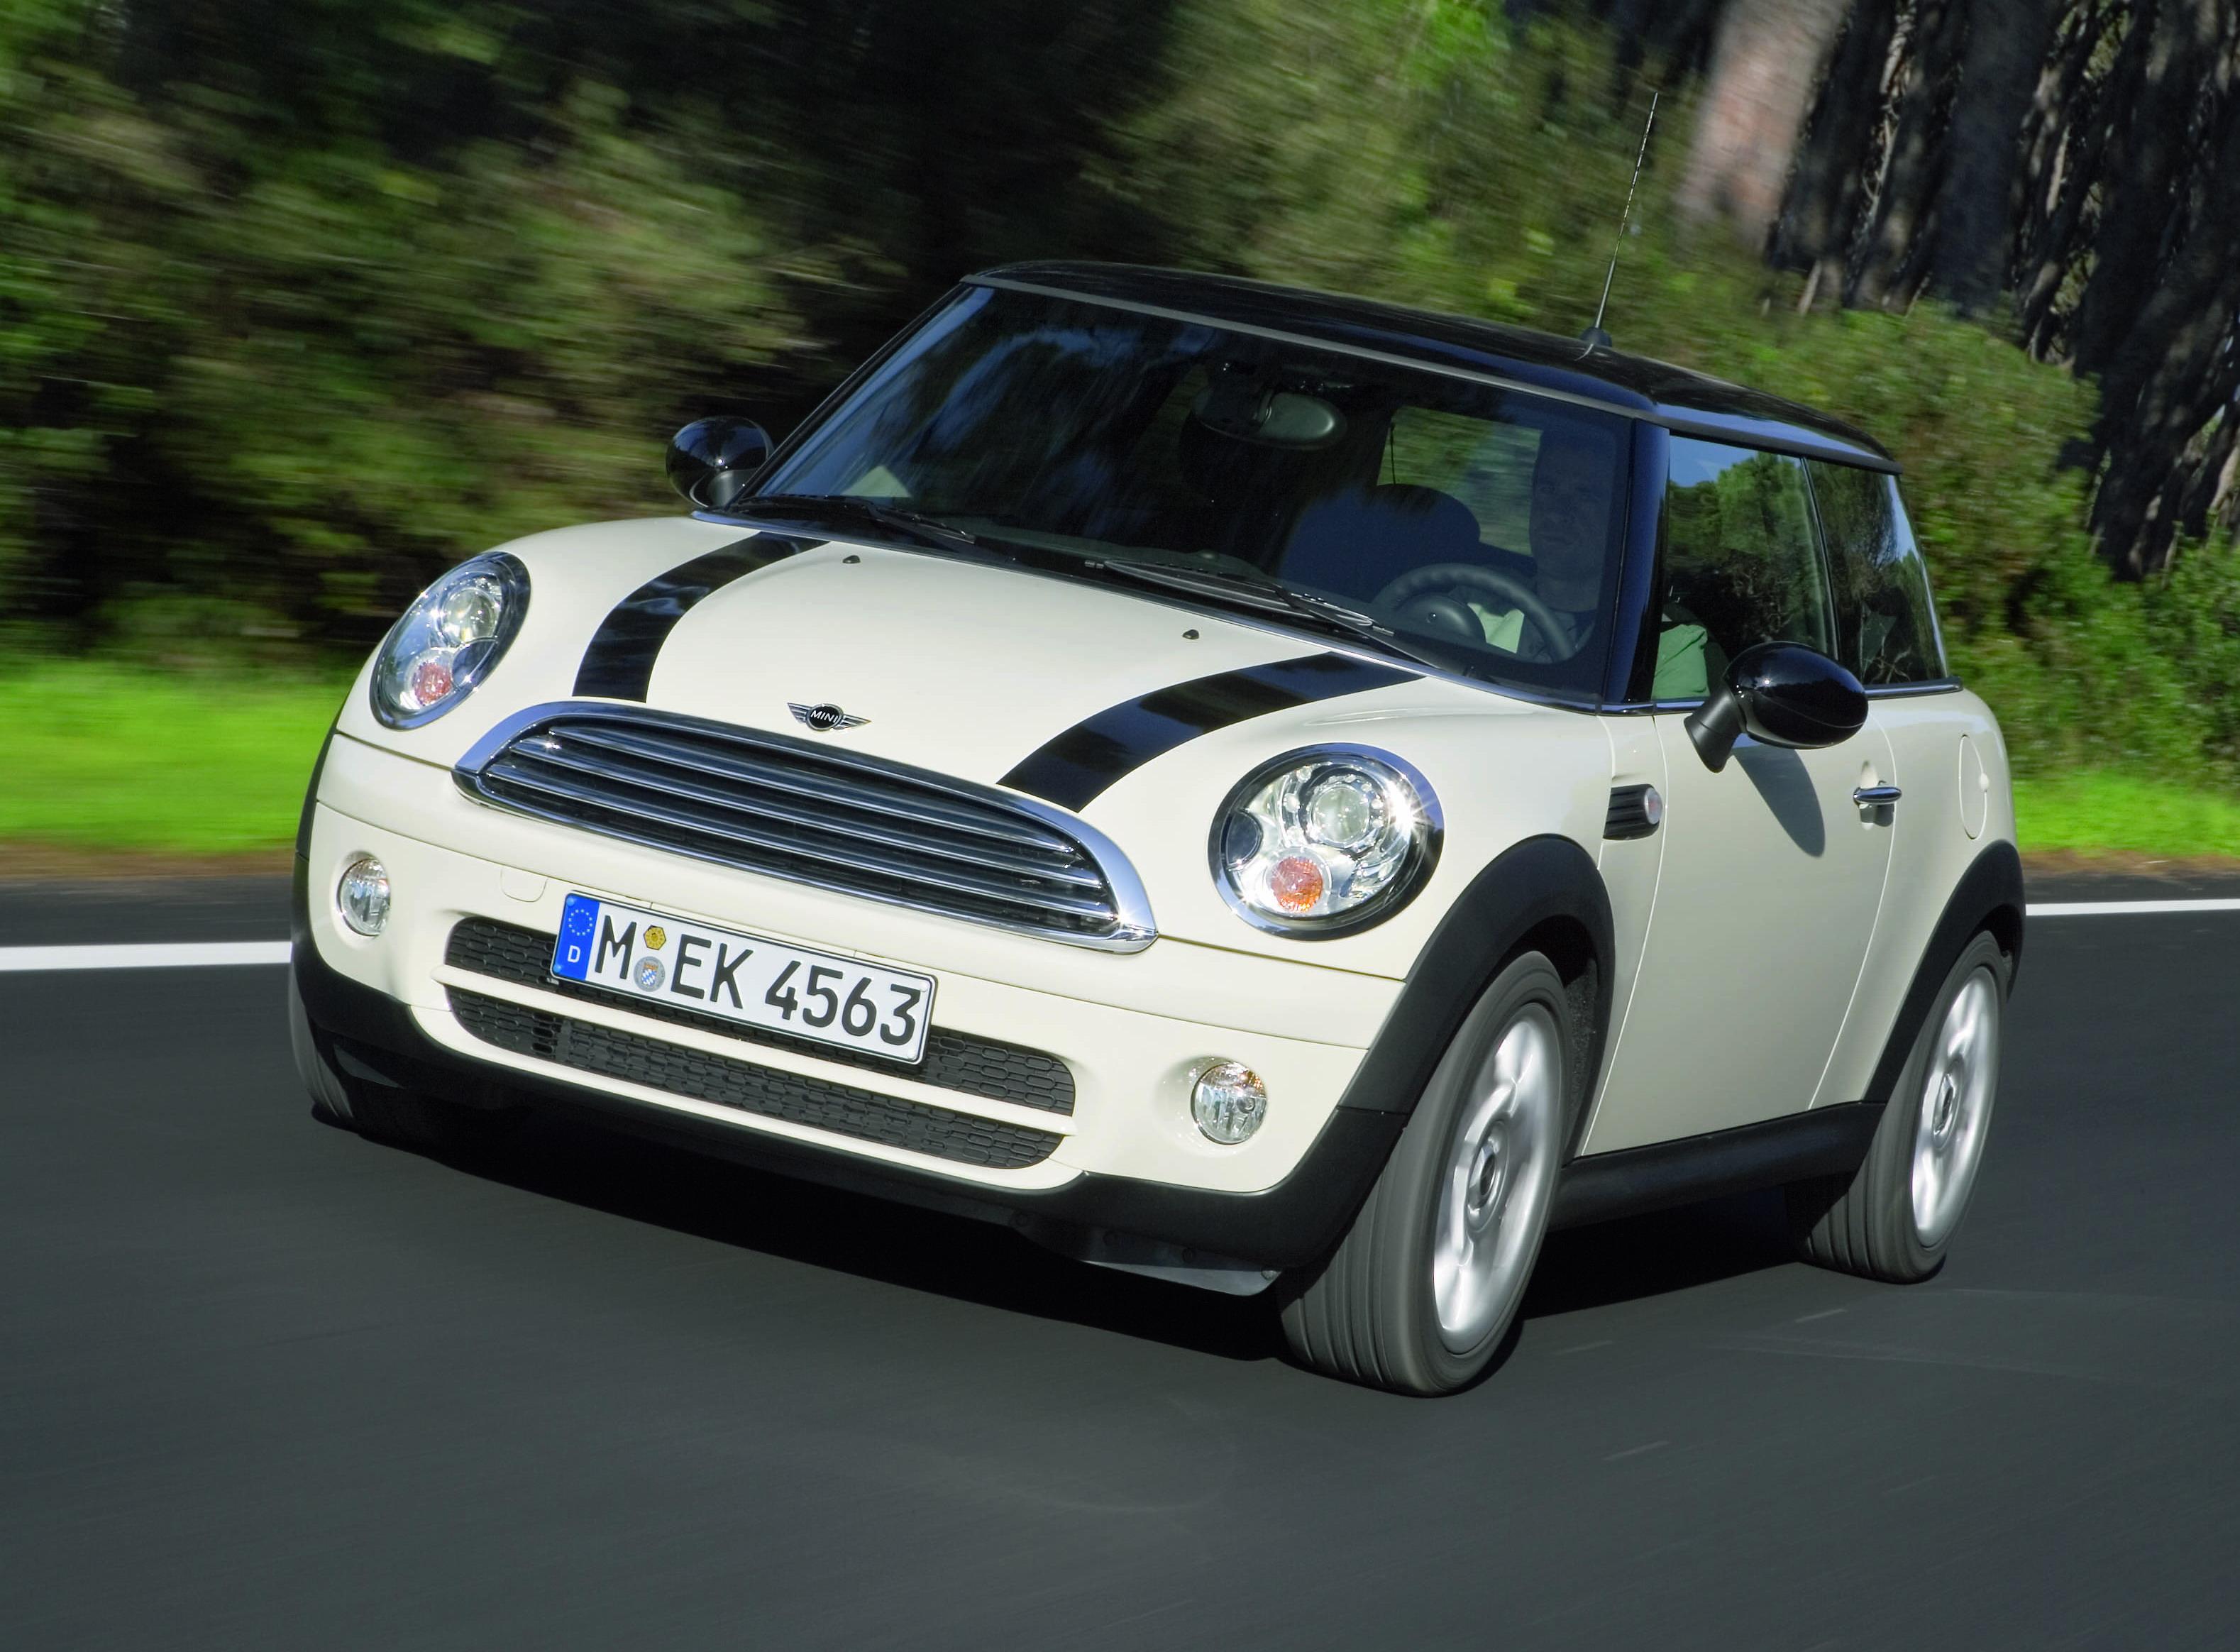 MINI One Countryman hd specifications